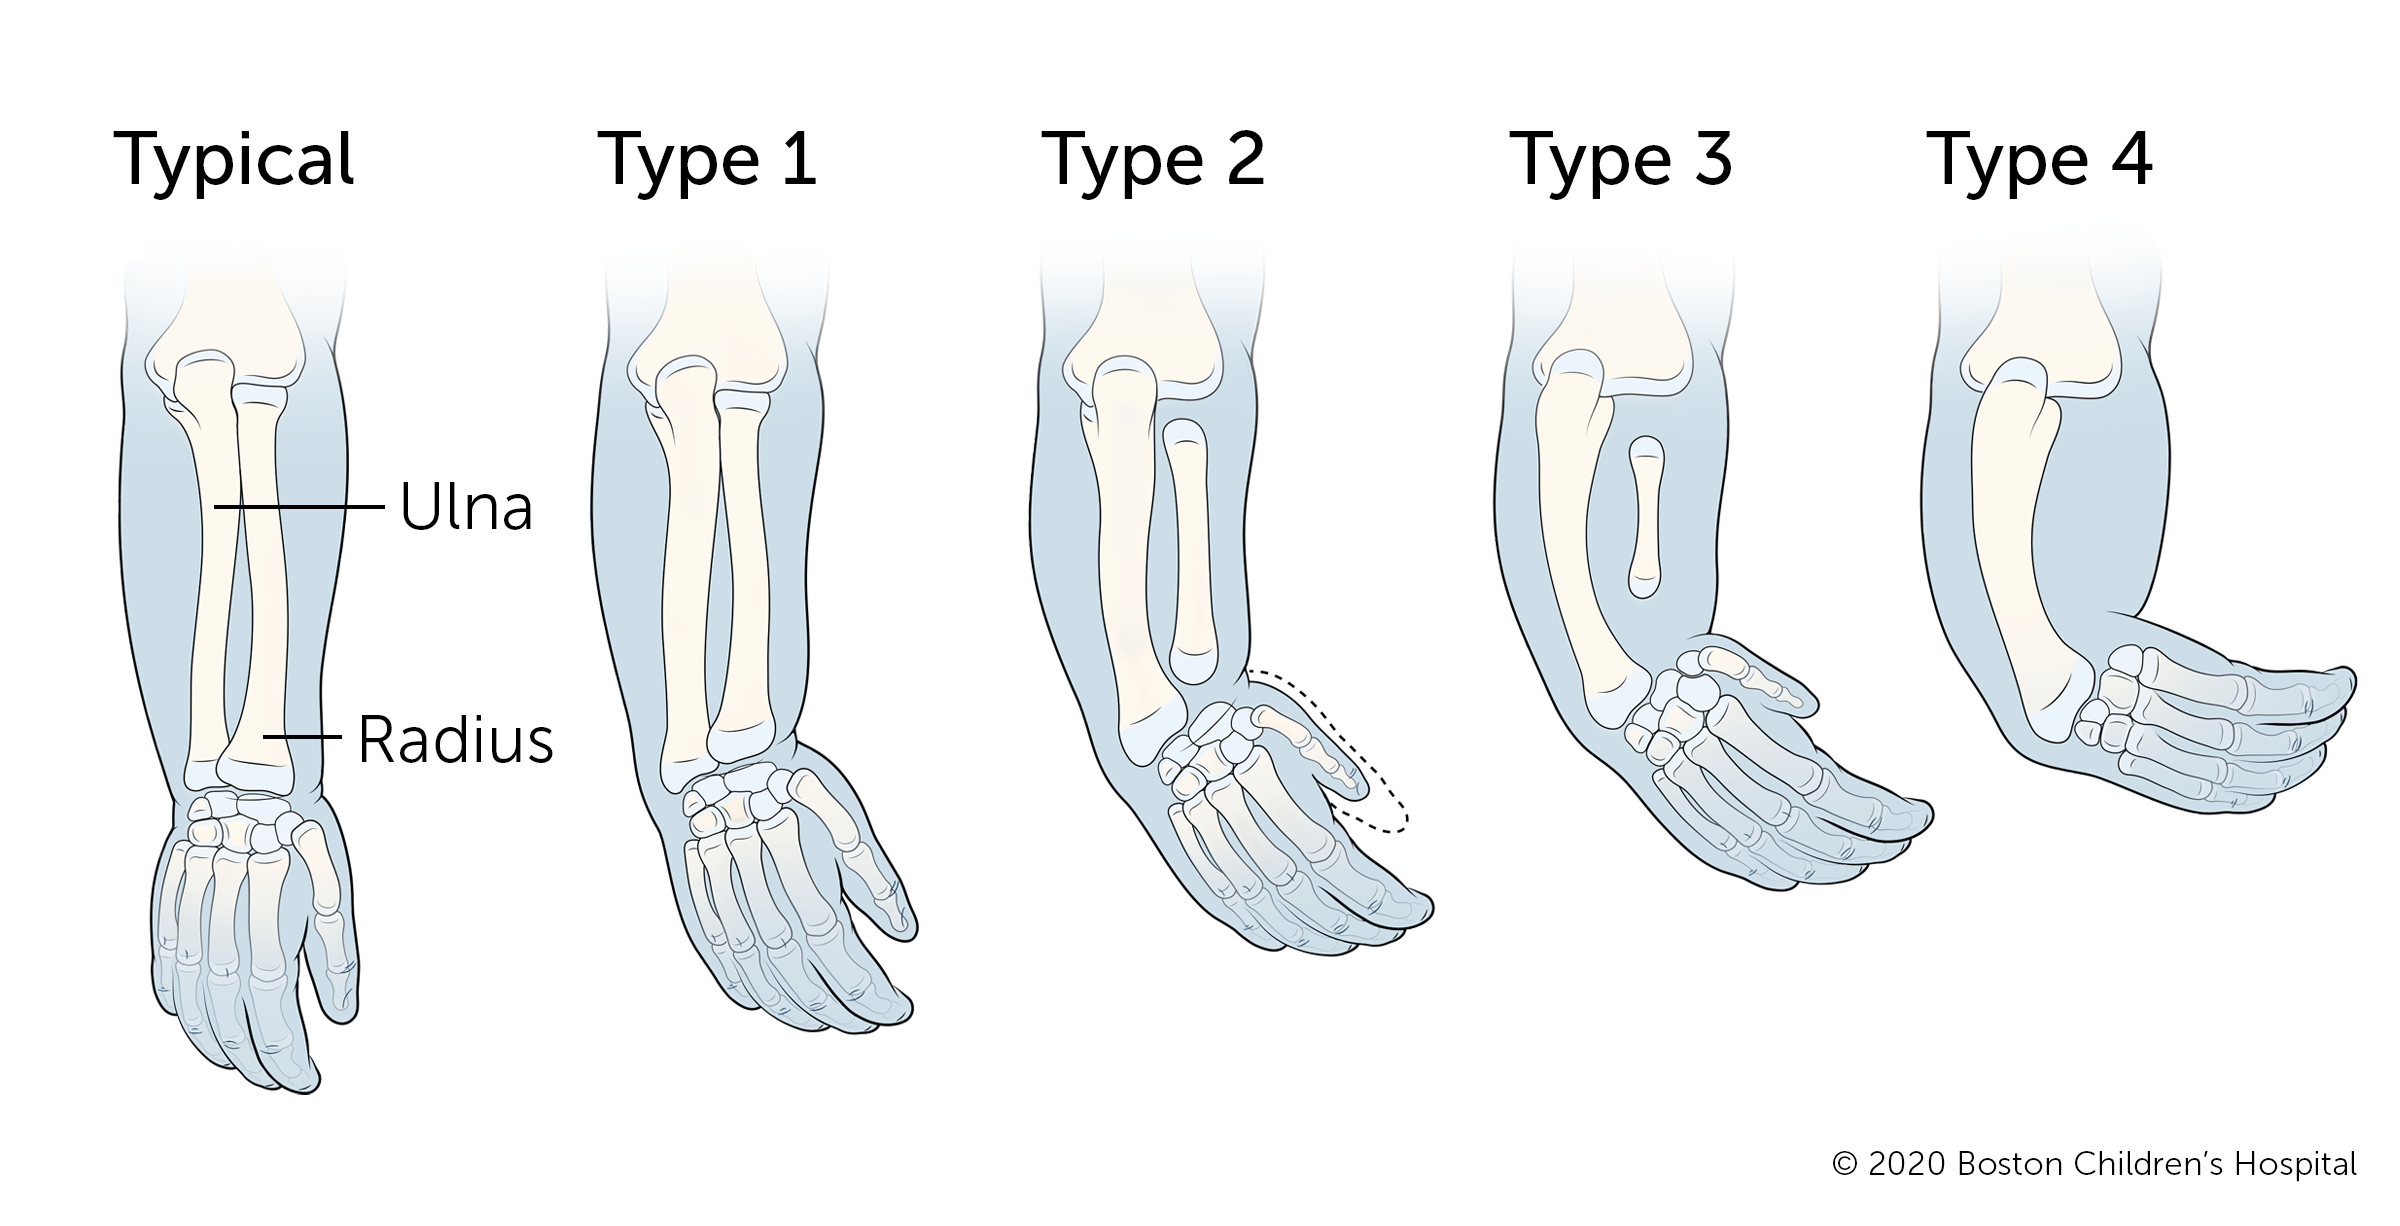 A typical arm compared to four types of radial longitudinal deficiency. Type 1 is the least severe type and type 4 the most severe. In type 1, the radius (the bone on the inside of the forearm) is slightly shorter than the ulna (the bone on the outside of the forearm). In types 2 and 3, the radius is significantly shorter than the ulna and the hand curves inward. In type 4, the ulna is completely missing. The thumb tends to be smaller in more severe types. 